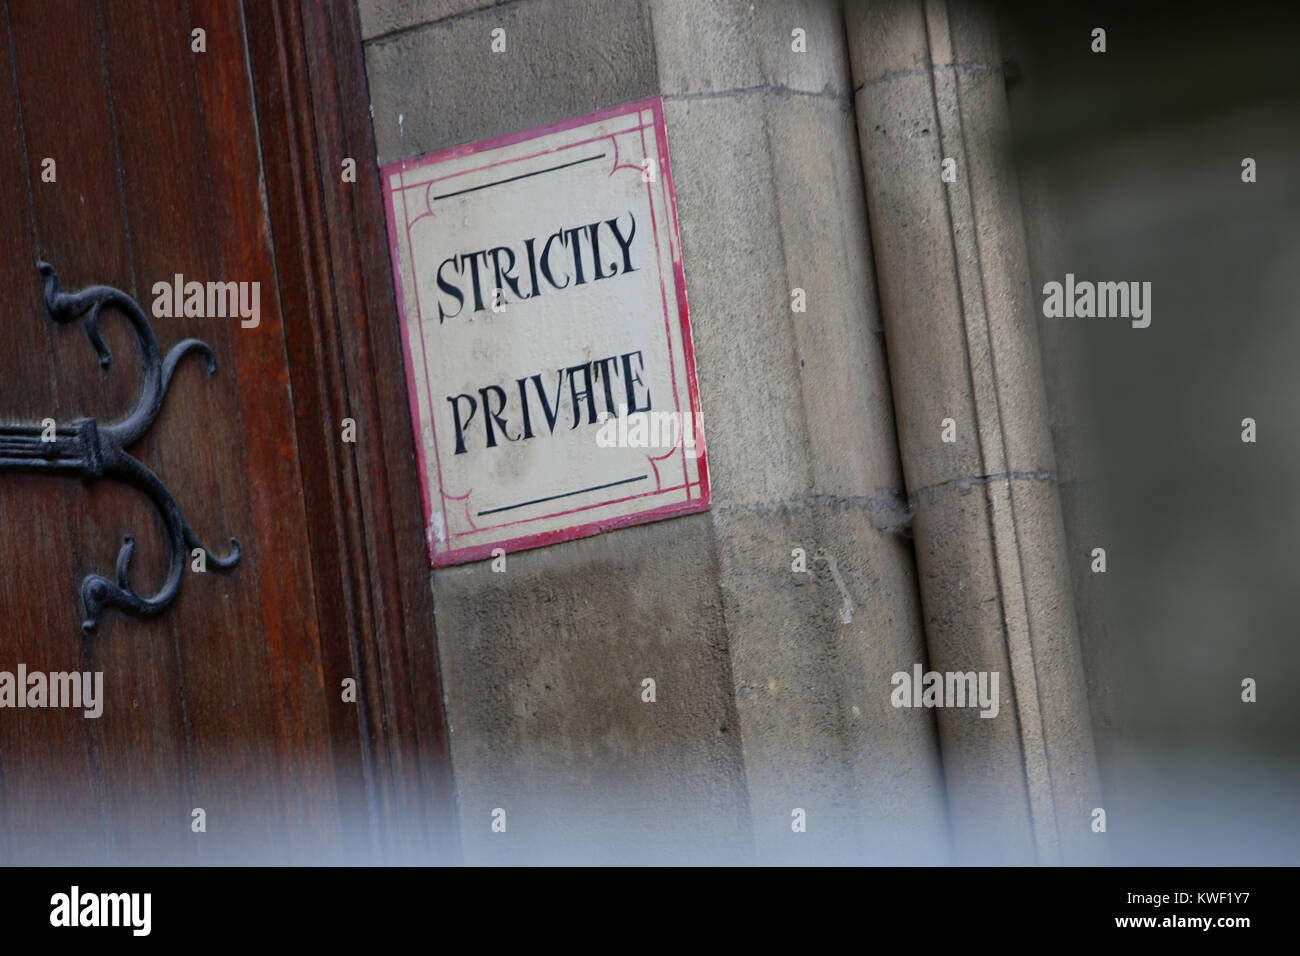 A Strictly Private sign photographed behind cast iron gates in London, UK. Stock Photo